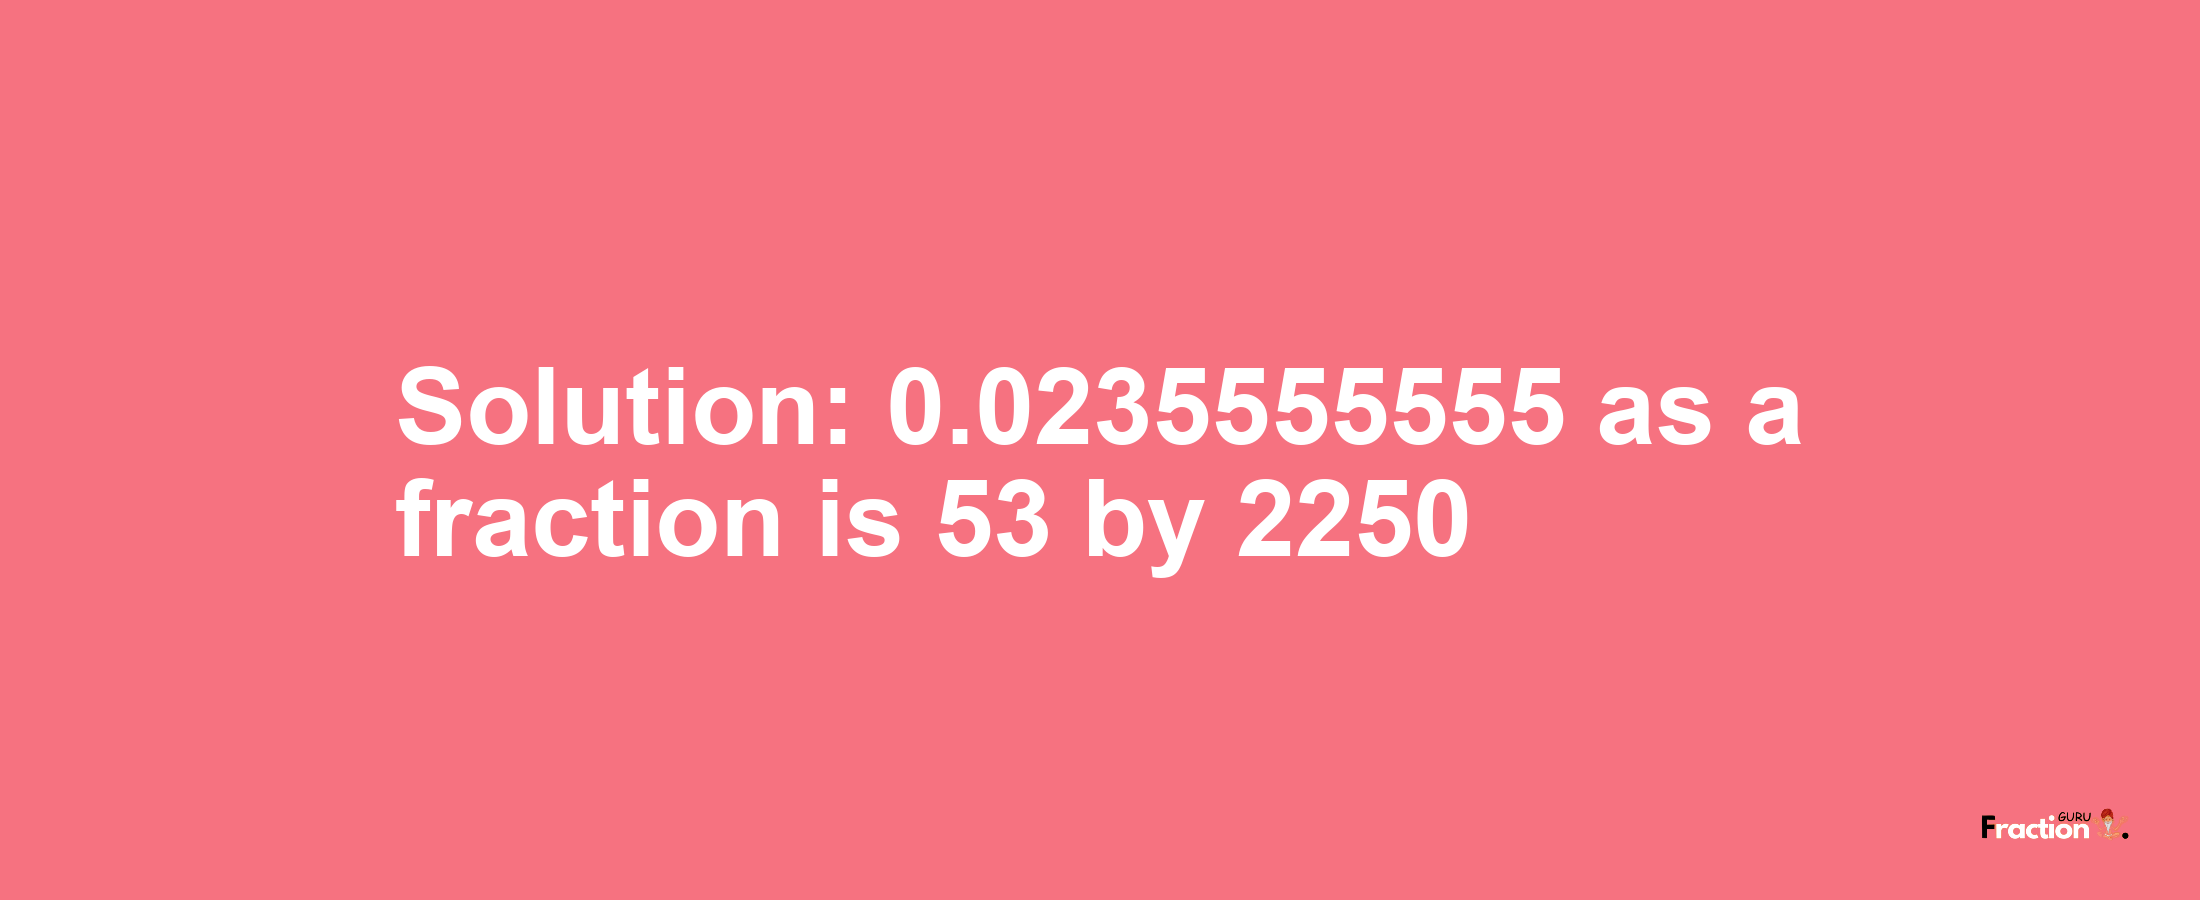 Solution:0.0235555555 as a fraction is 53/2250